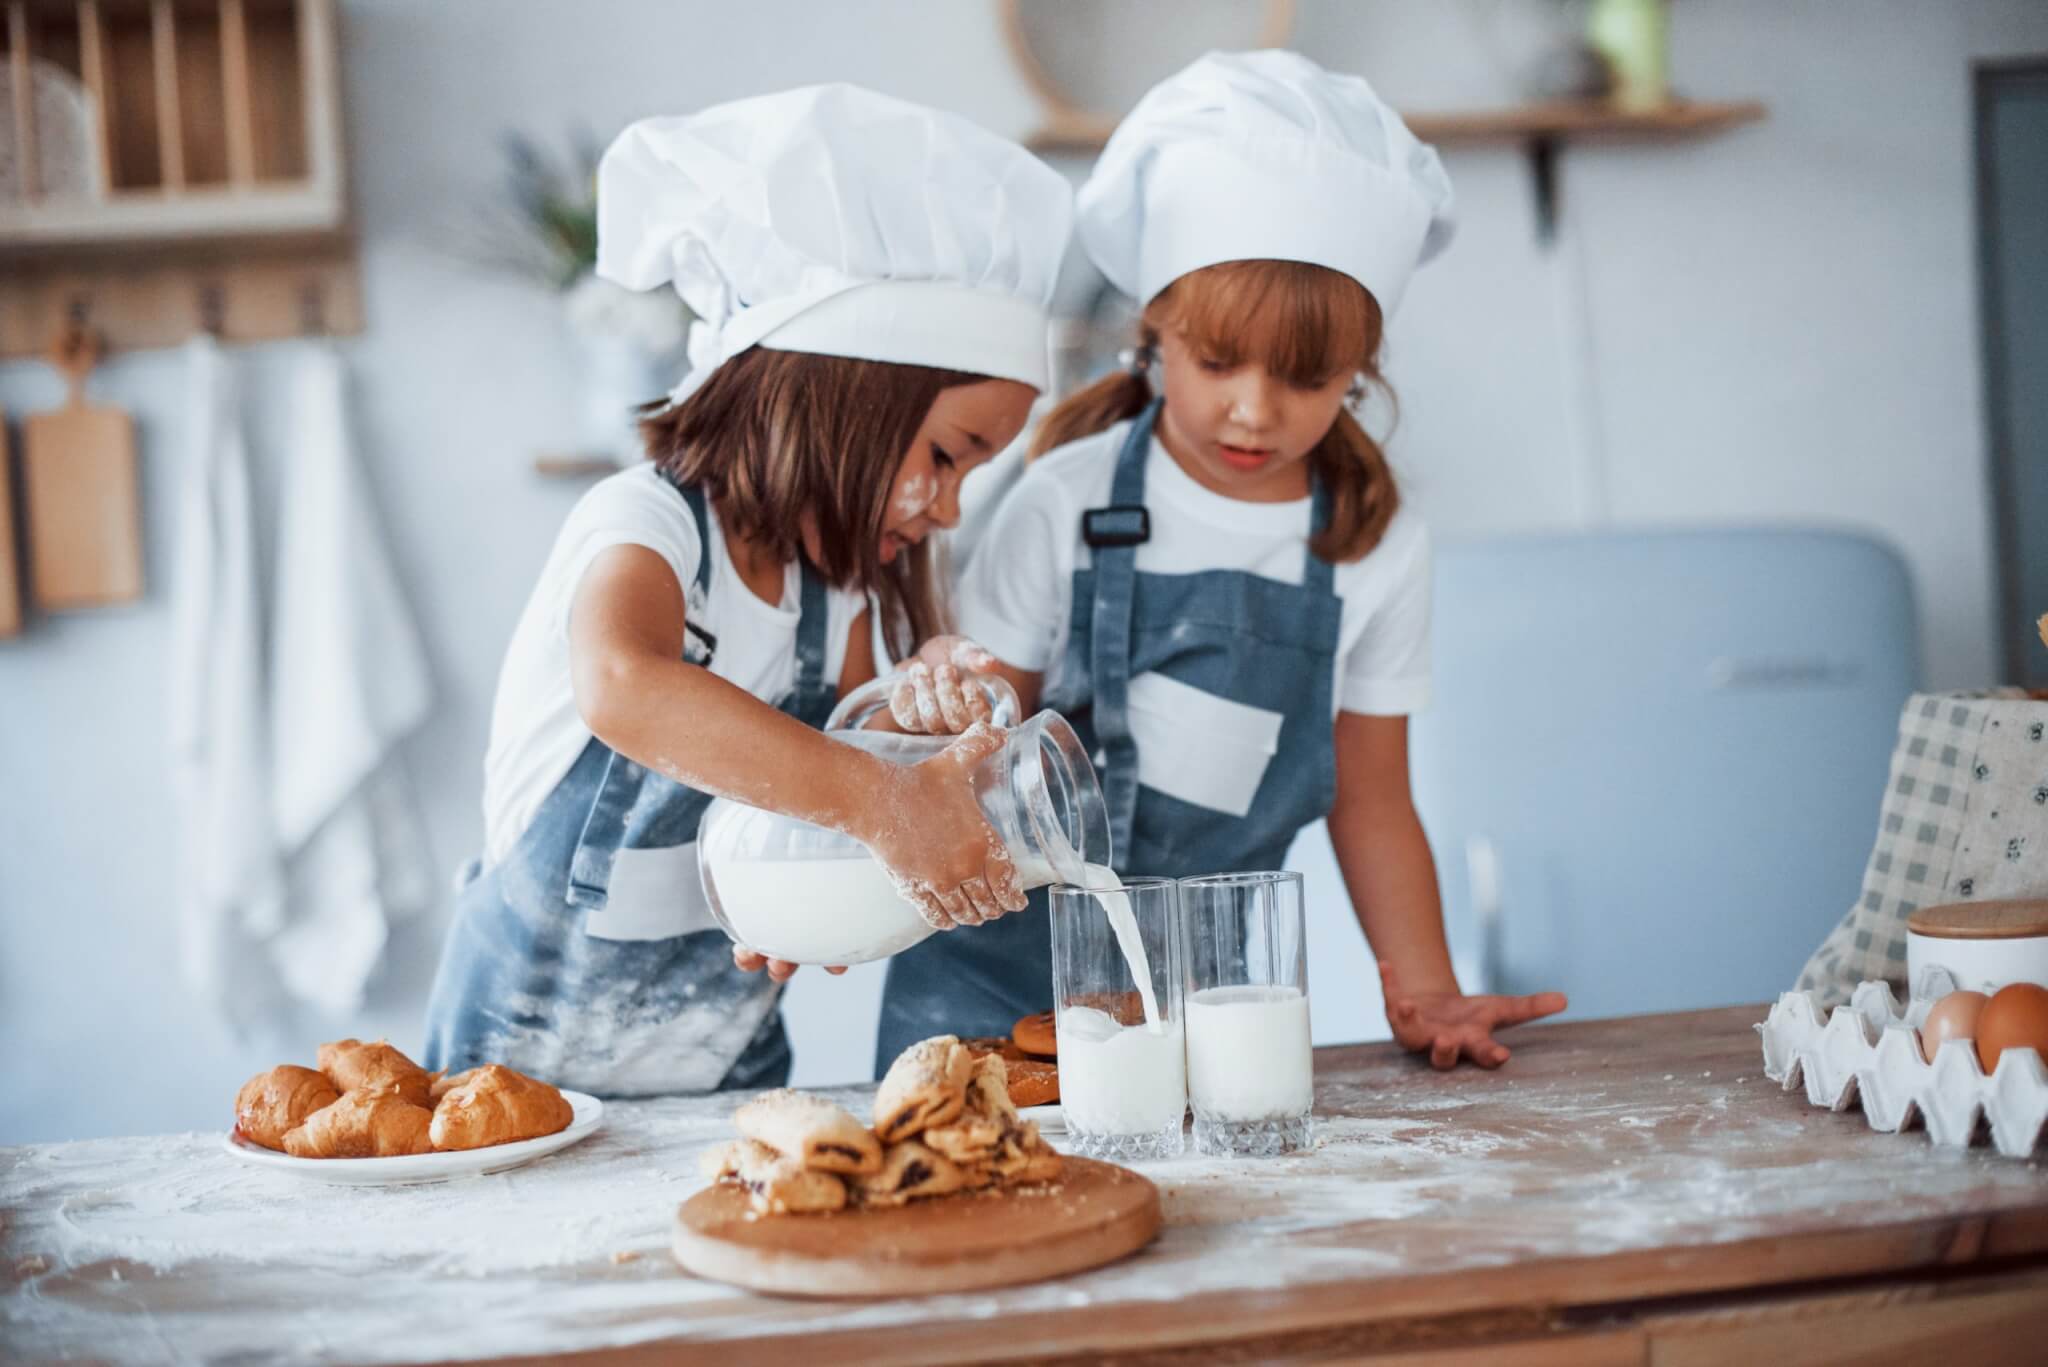 Easiest Recipes To Bake With Kids: Top 5 Child-Friendly Dishes Most  Recommended By Food Experts - Study Finds